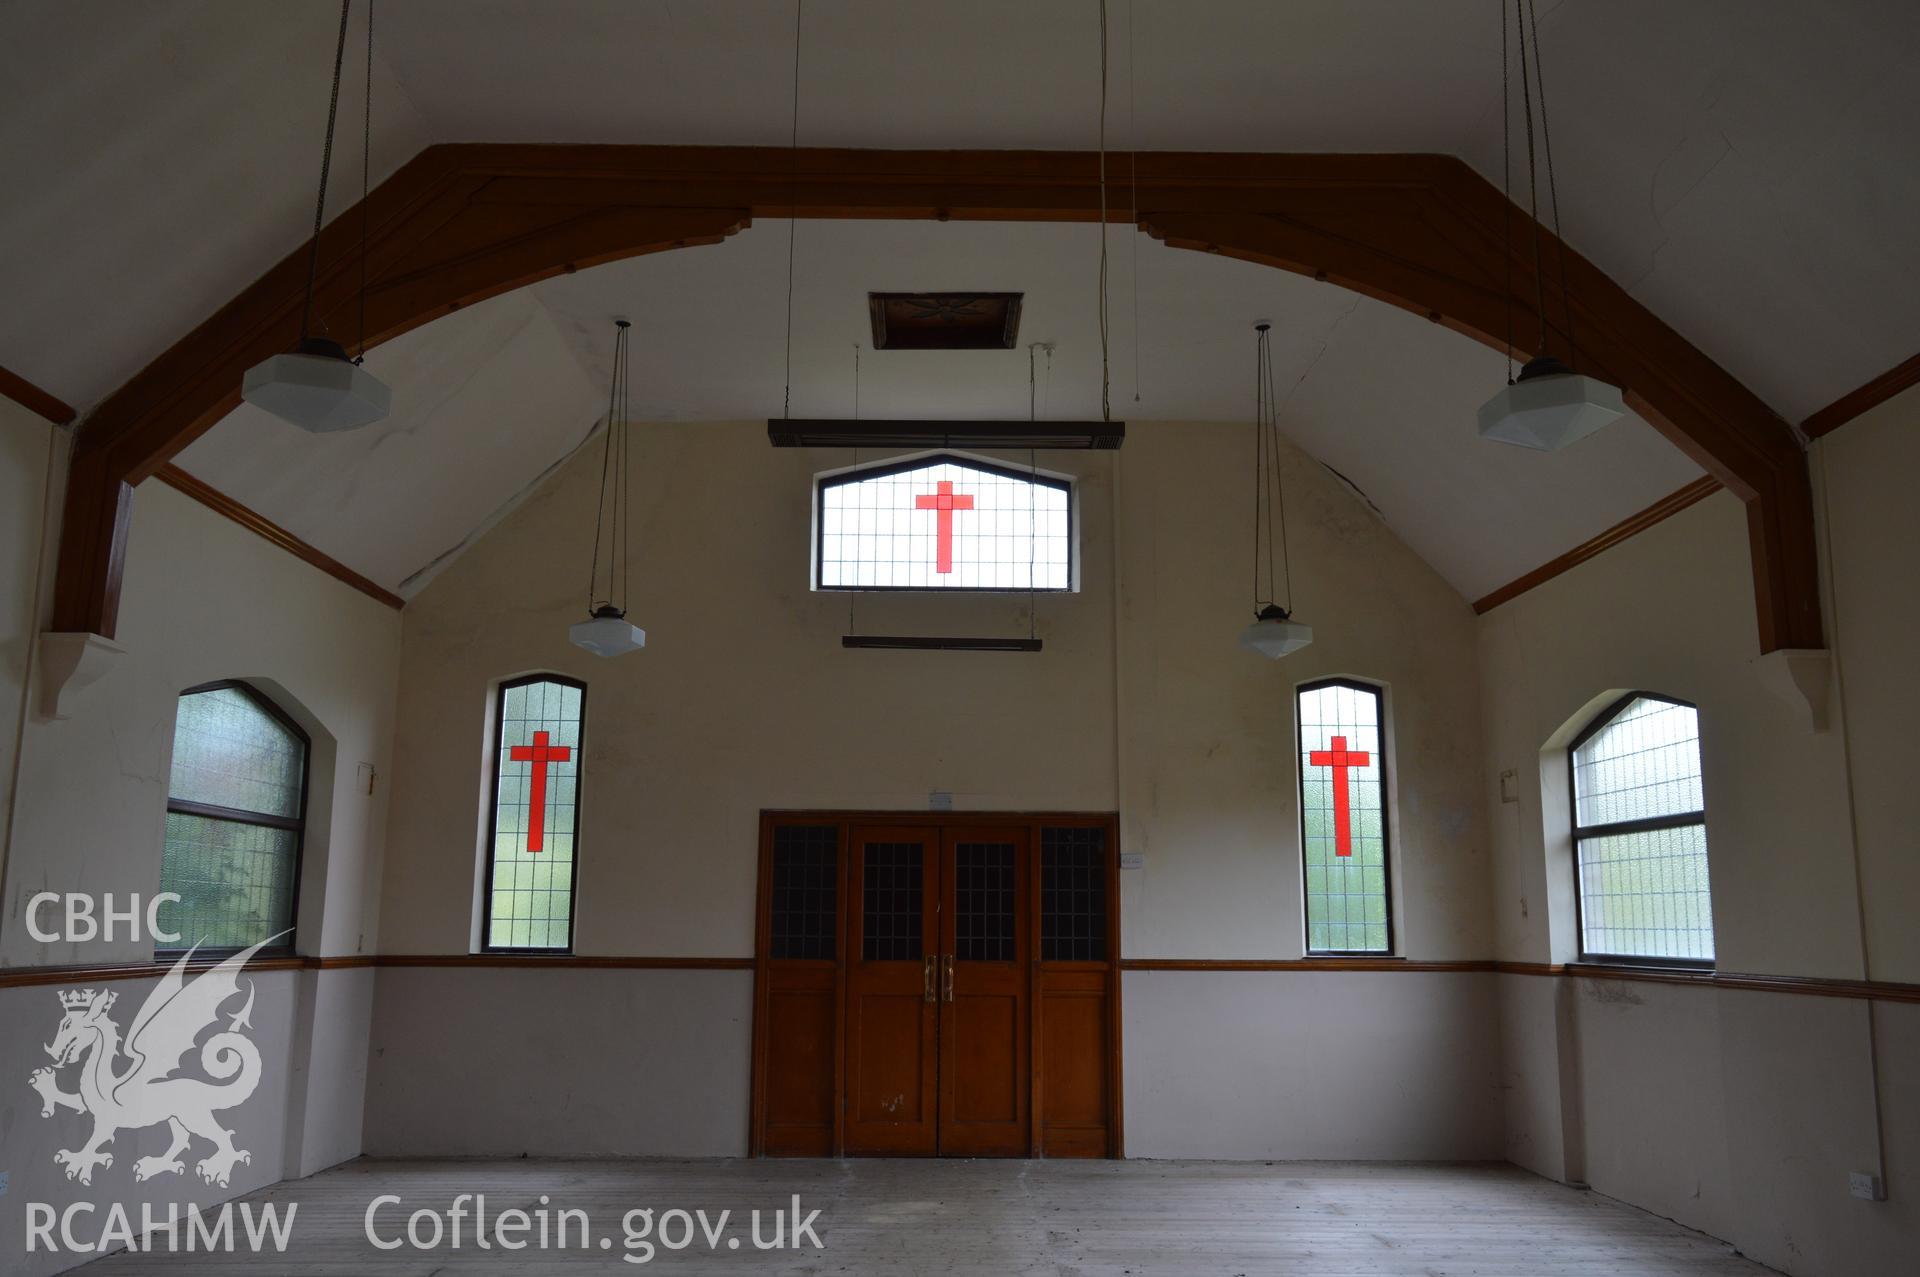 Internal view of west elevation in main church hall. Digital colour photograph taken during CPAT Project 2396 at the United Reformed Church in Northop. Prepared by Clwyd Powys Archaeological Trust, 2018-2019.